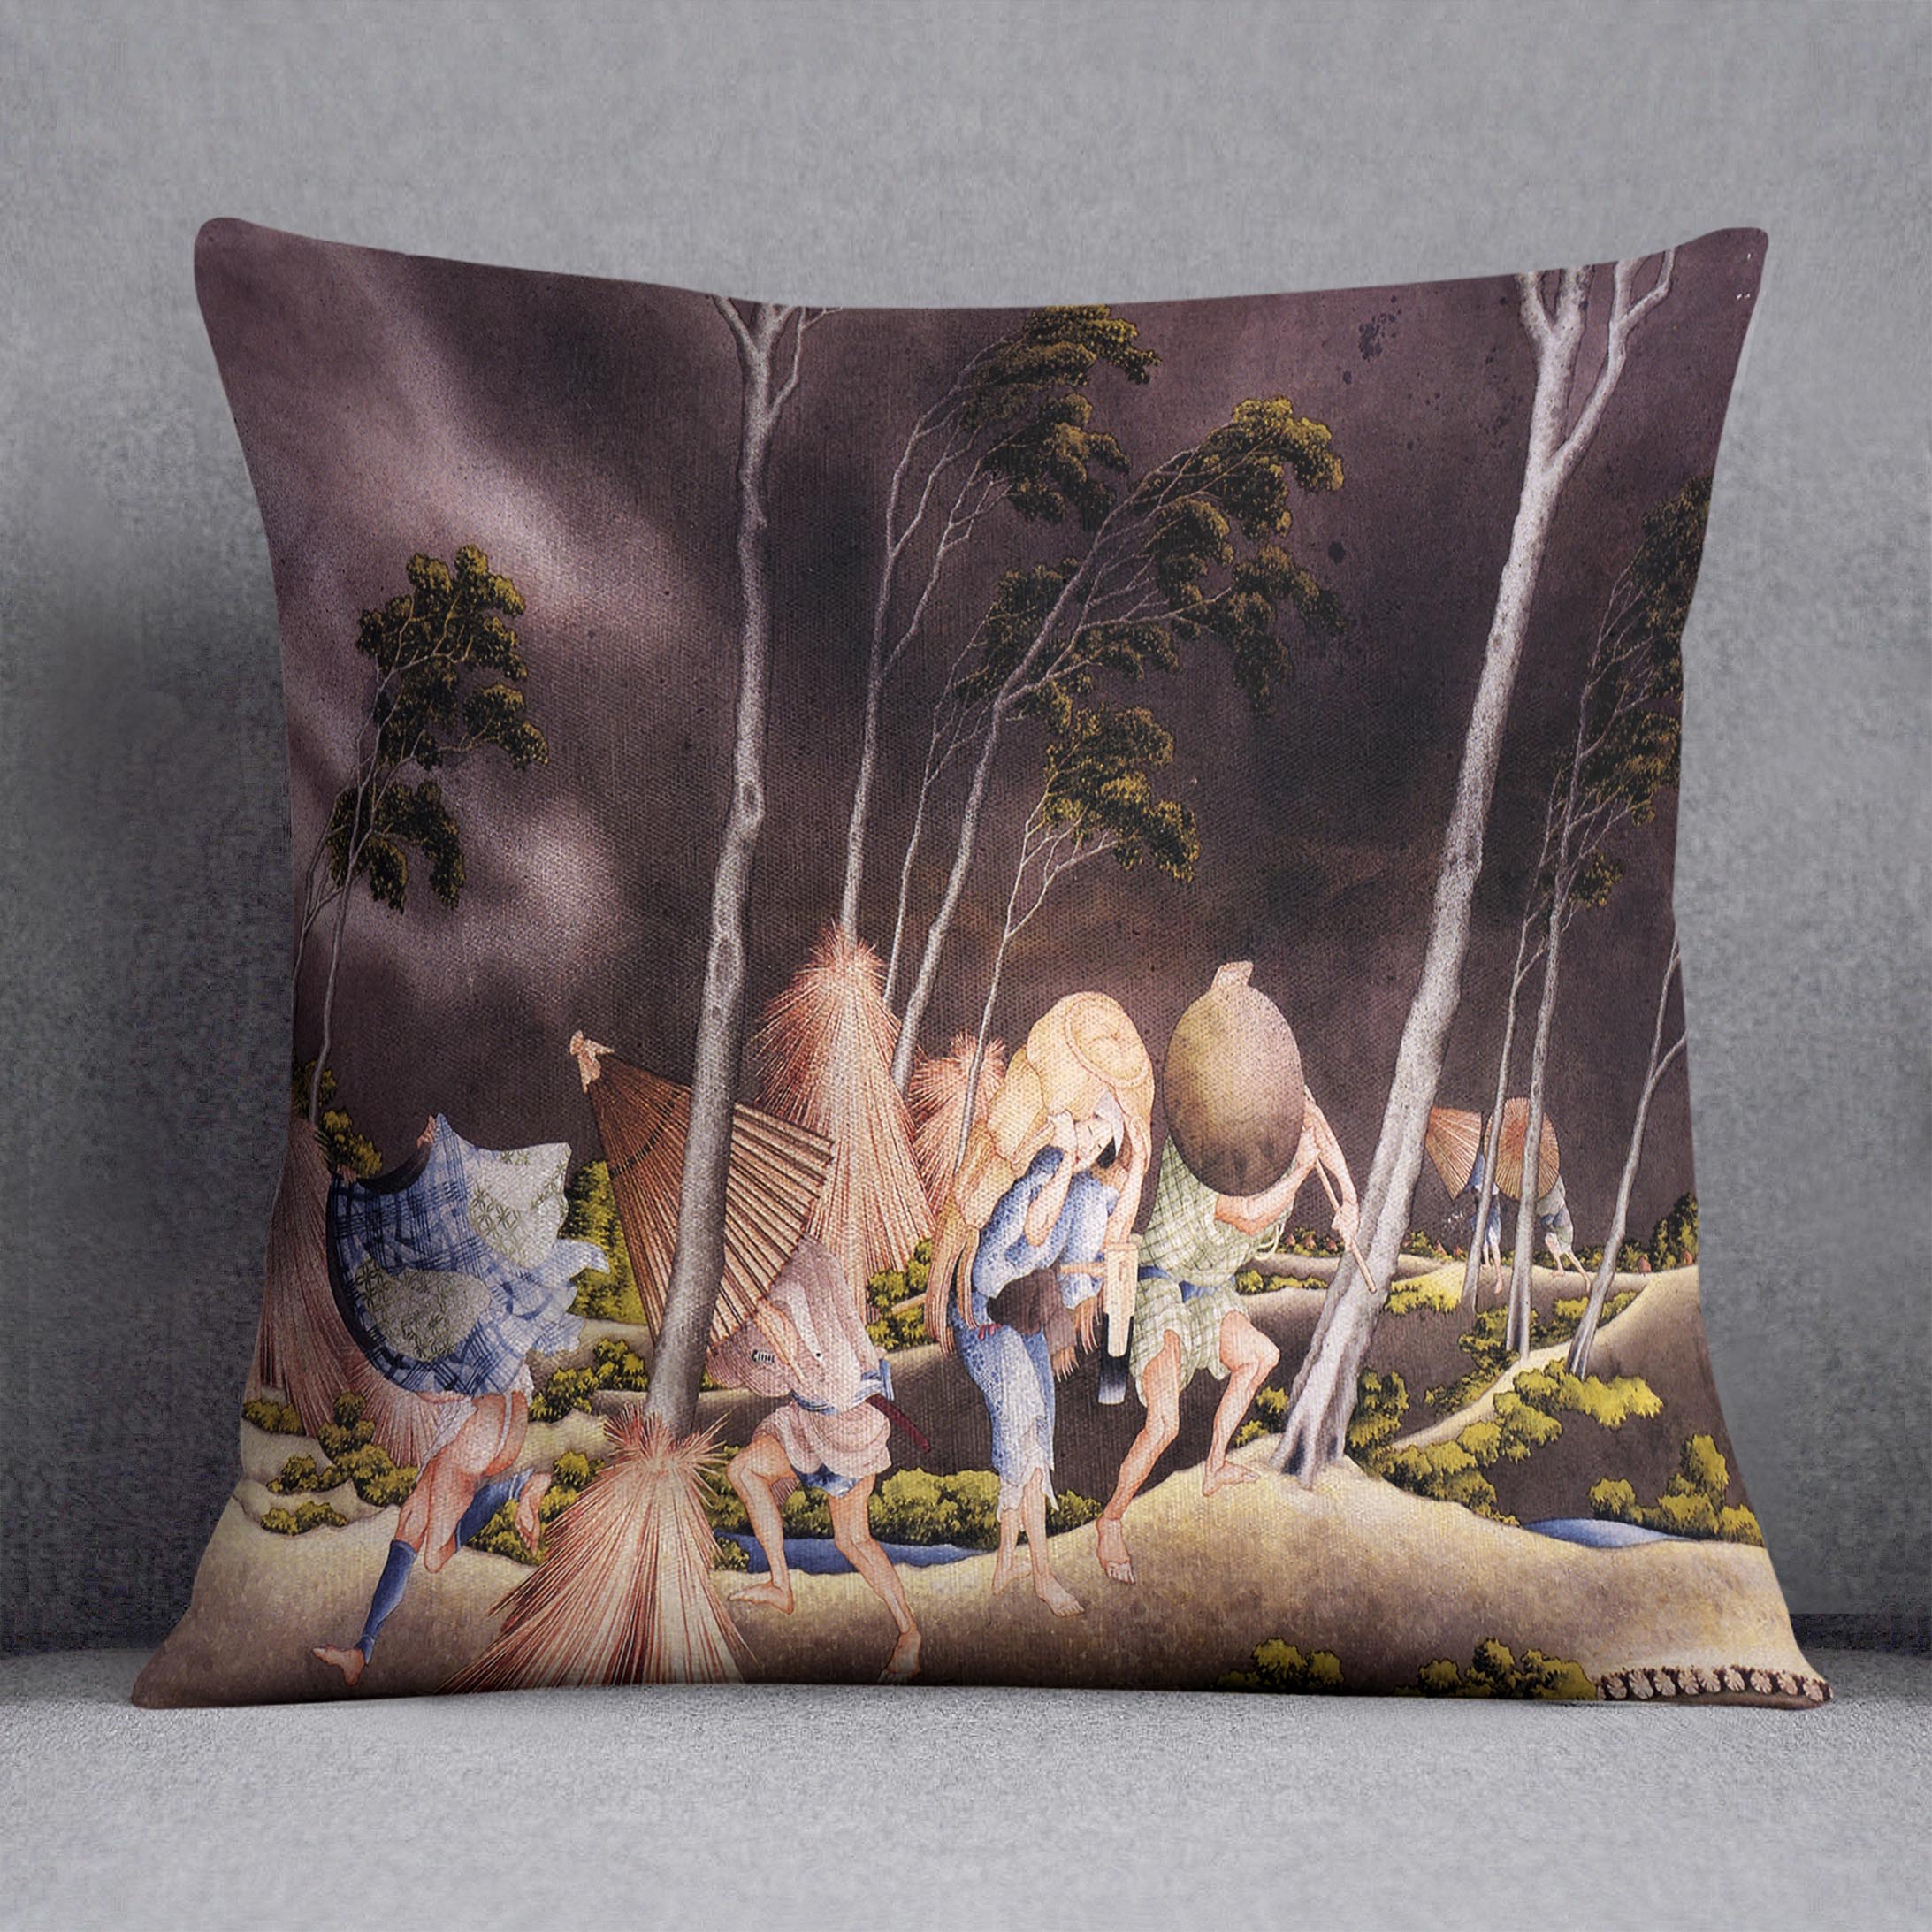 Peasants surprised by a violent storm by Hokusai Cushion